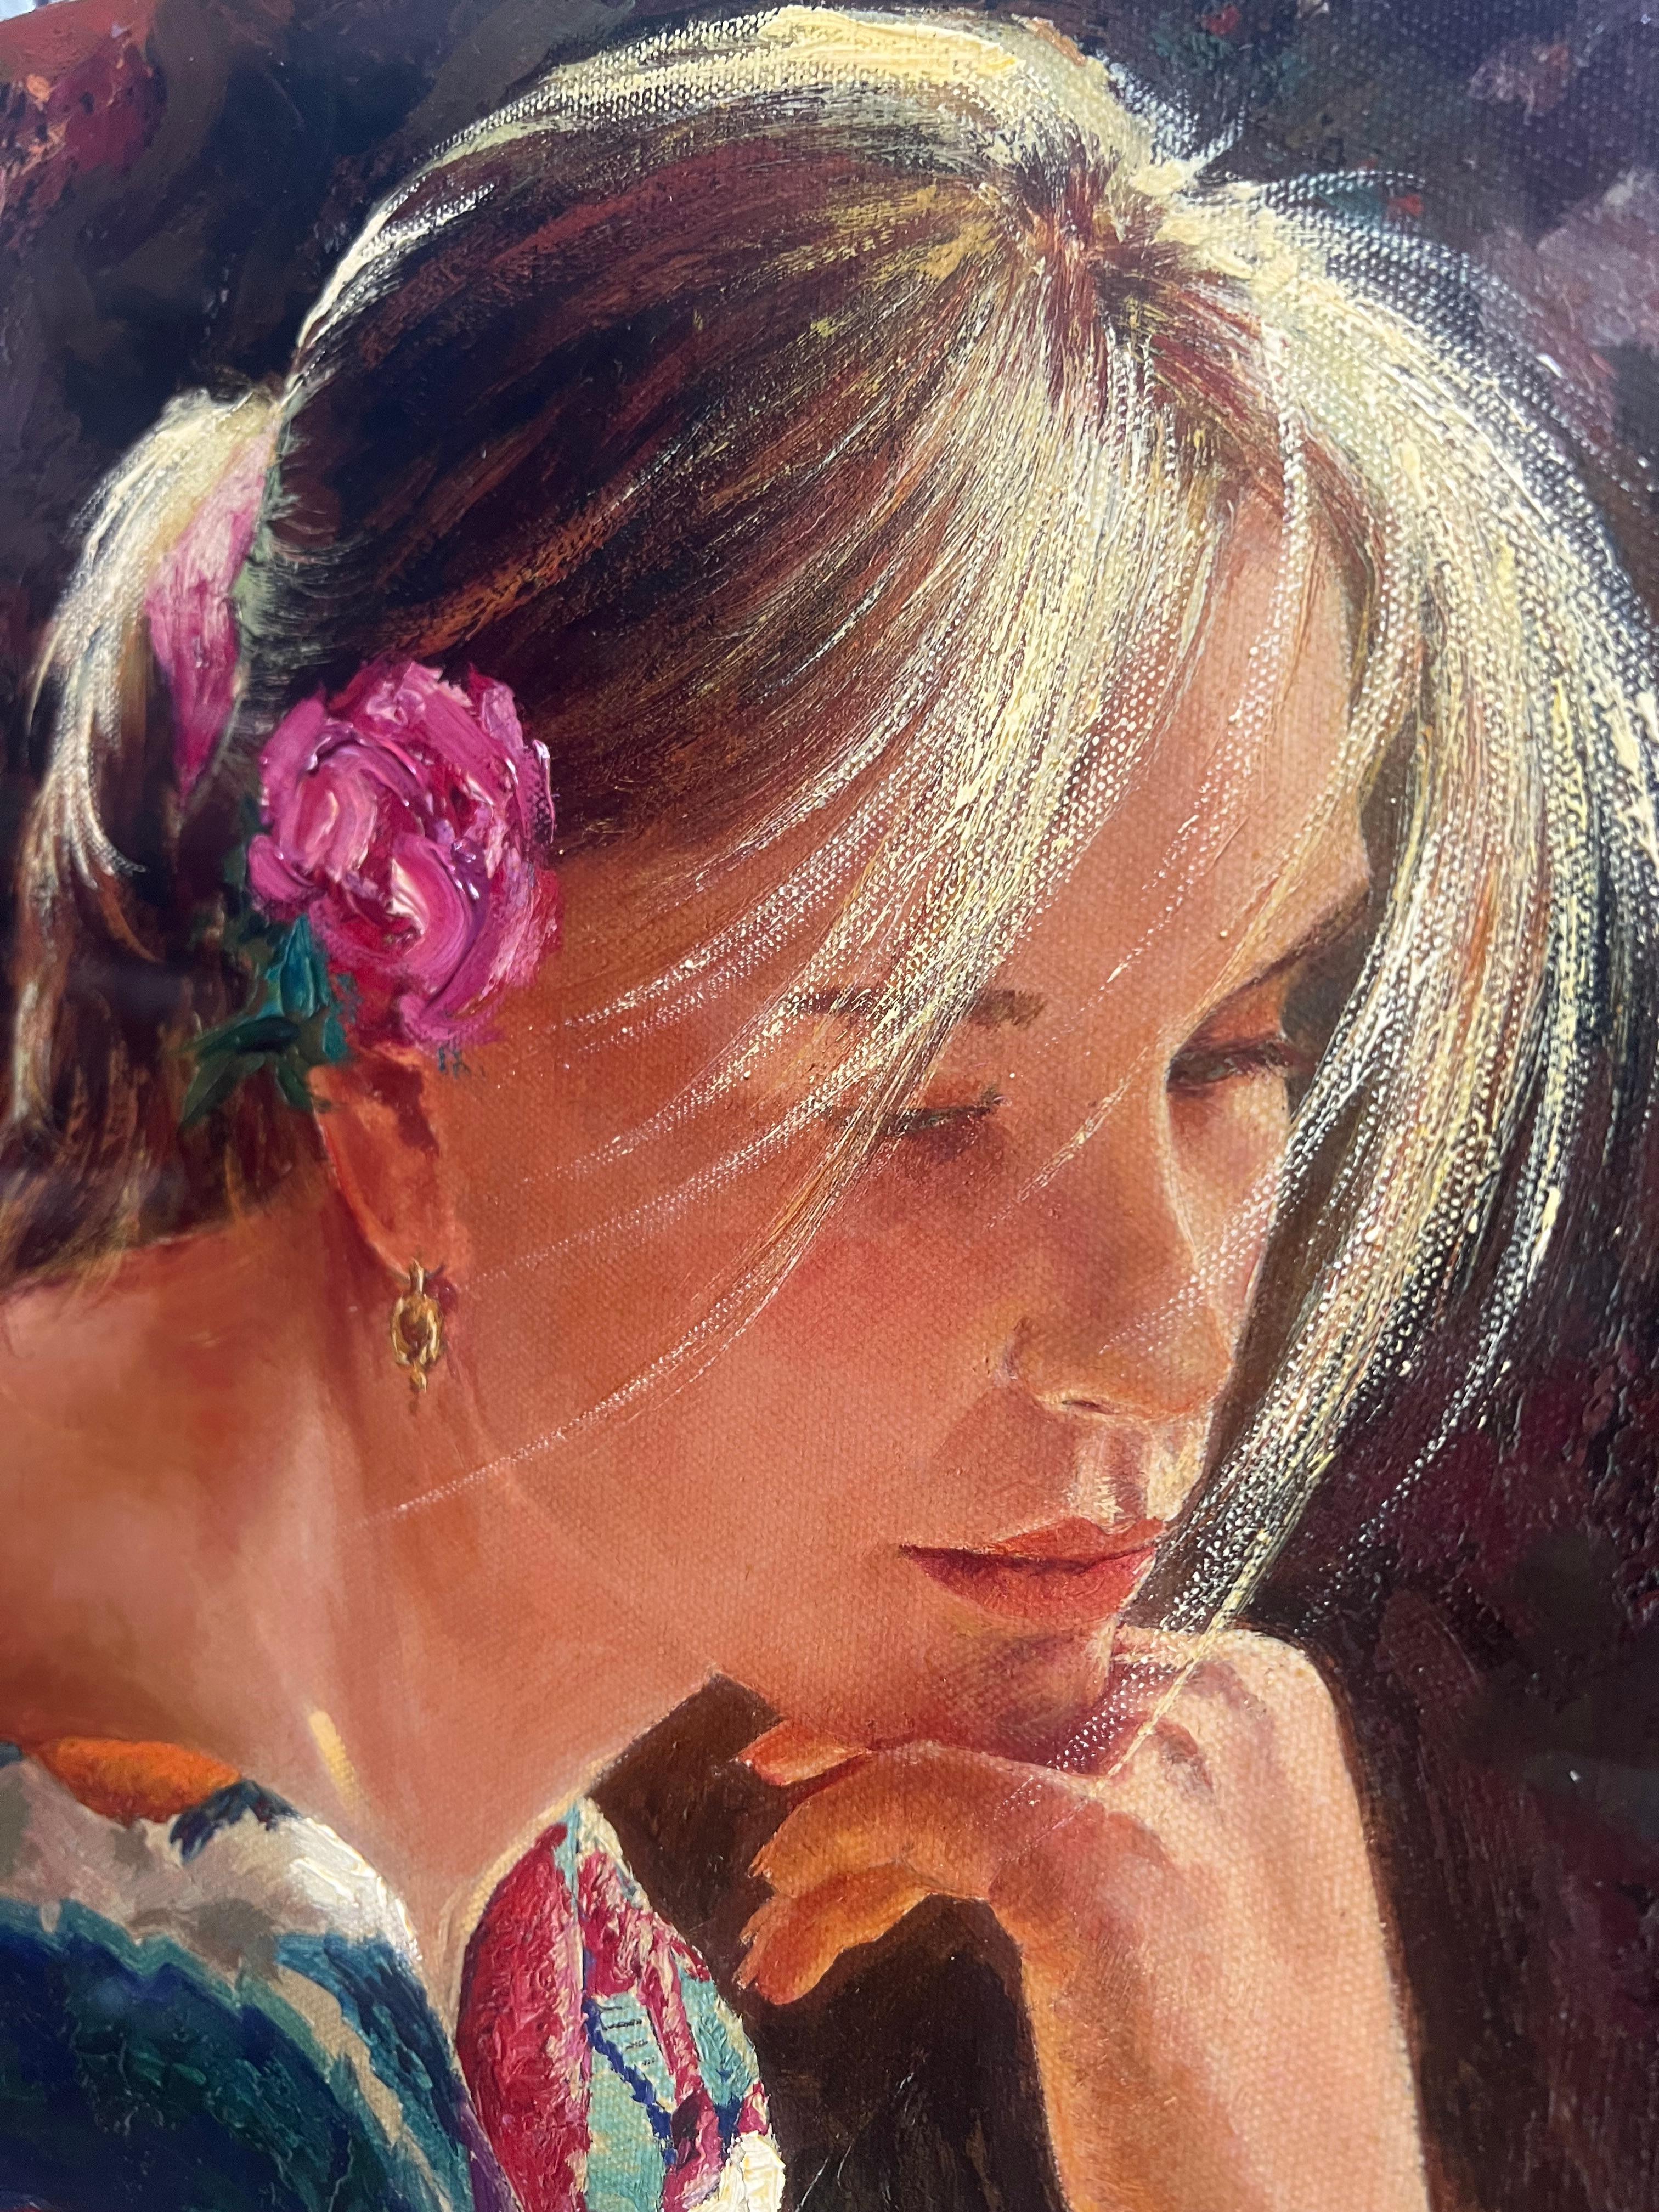 Thoughtful - Painting by Roman Frances